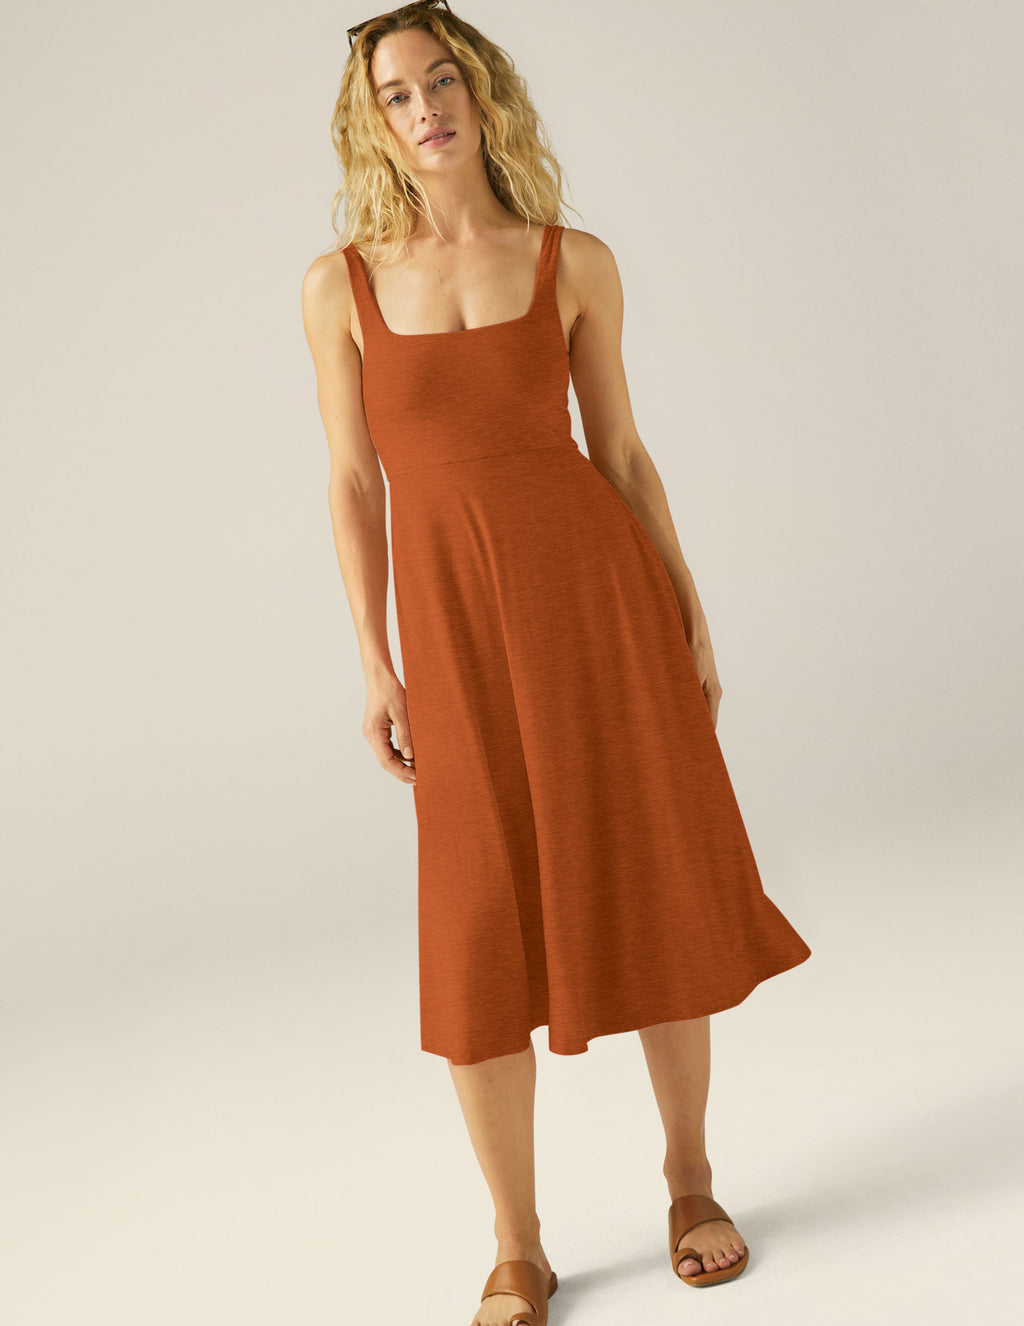 Featherweight At The Ready Square Neck Dress Featured Image